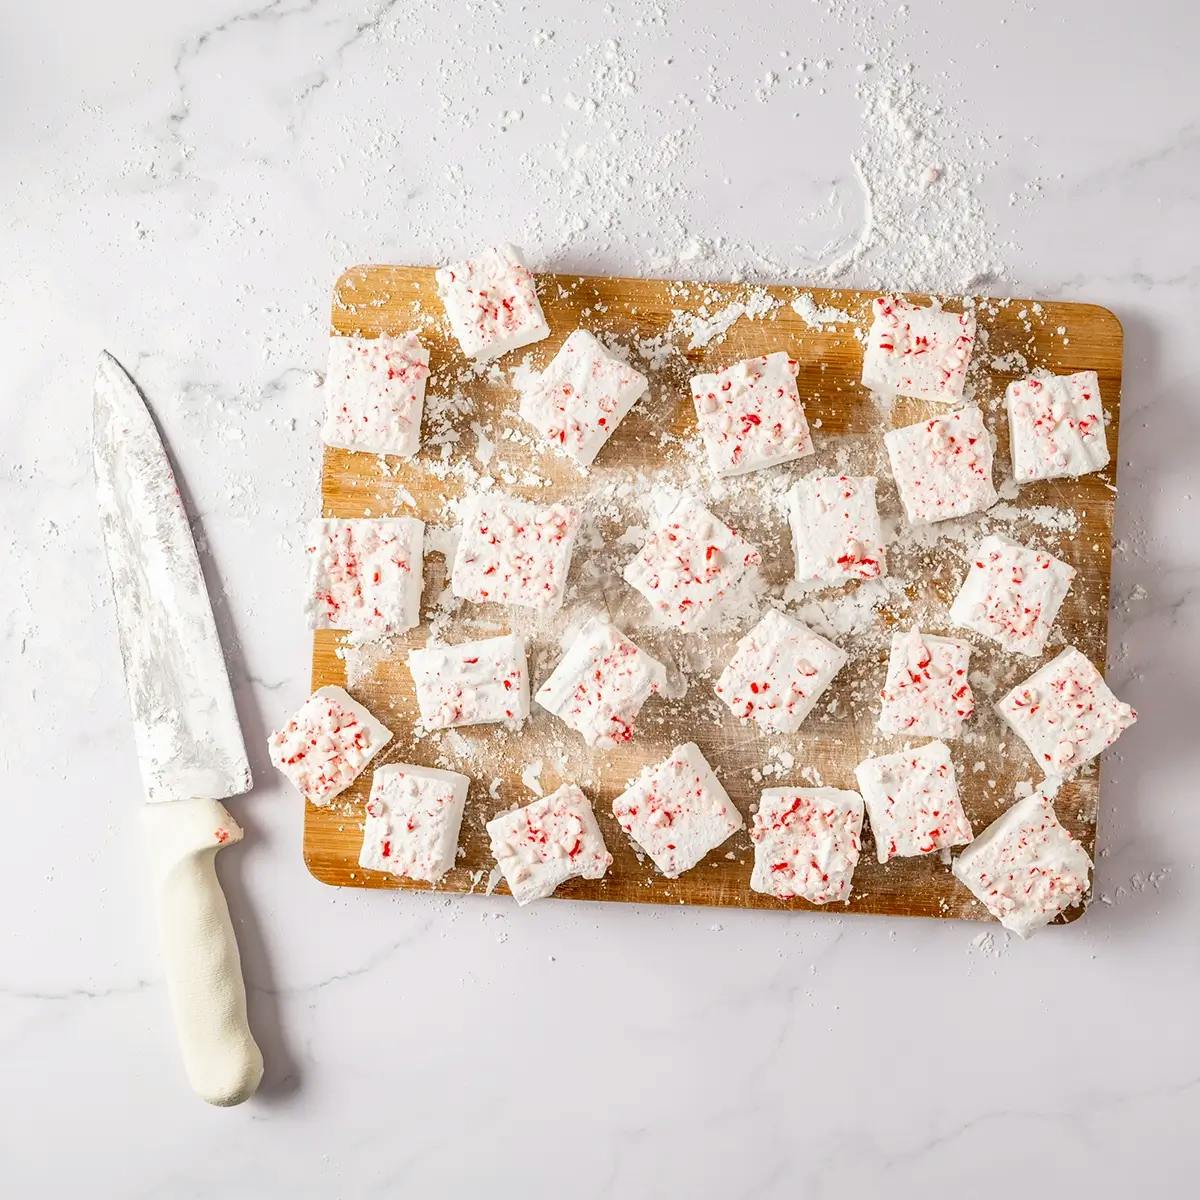 Cutting homemade marshmallows into pieces, ready to gift as Christmas marshmallows.